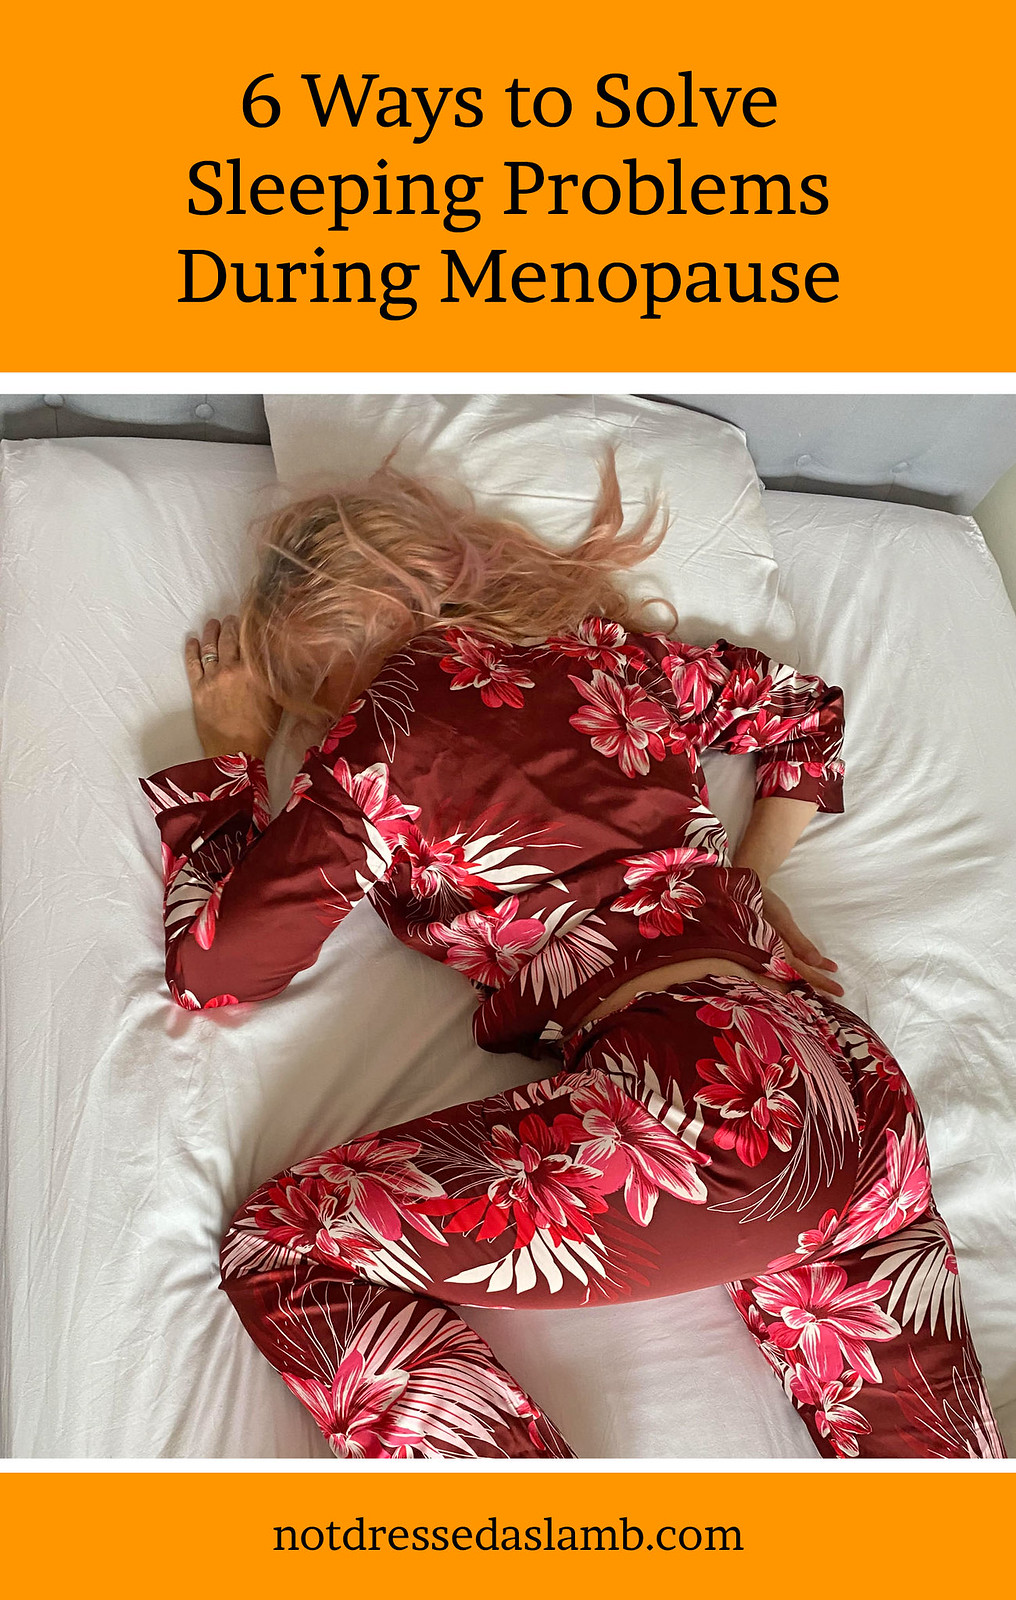 6 Ways to Solve Sleeping Problems During Menopause | by Catherine Summers, AKA Not Dressed As Lamb, Over 50 Health, Wellness and Lifestyle Blog